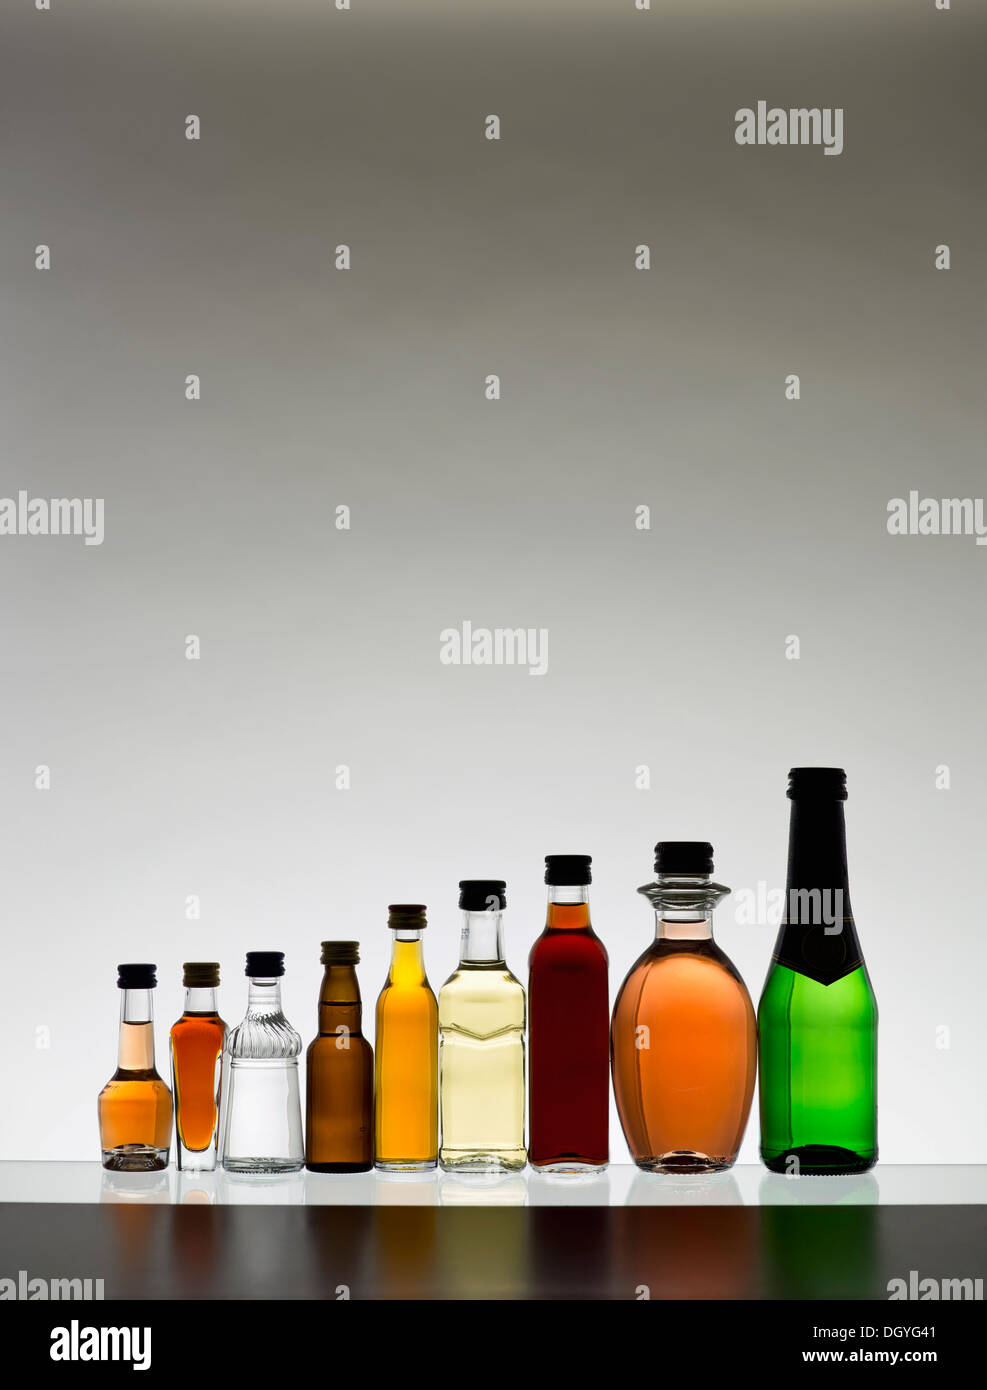 A line of various miniature bottles of alcohol without labels, back lit Stock Photo